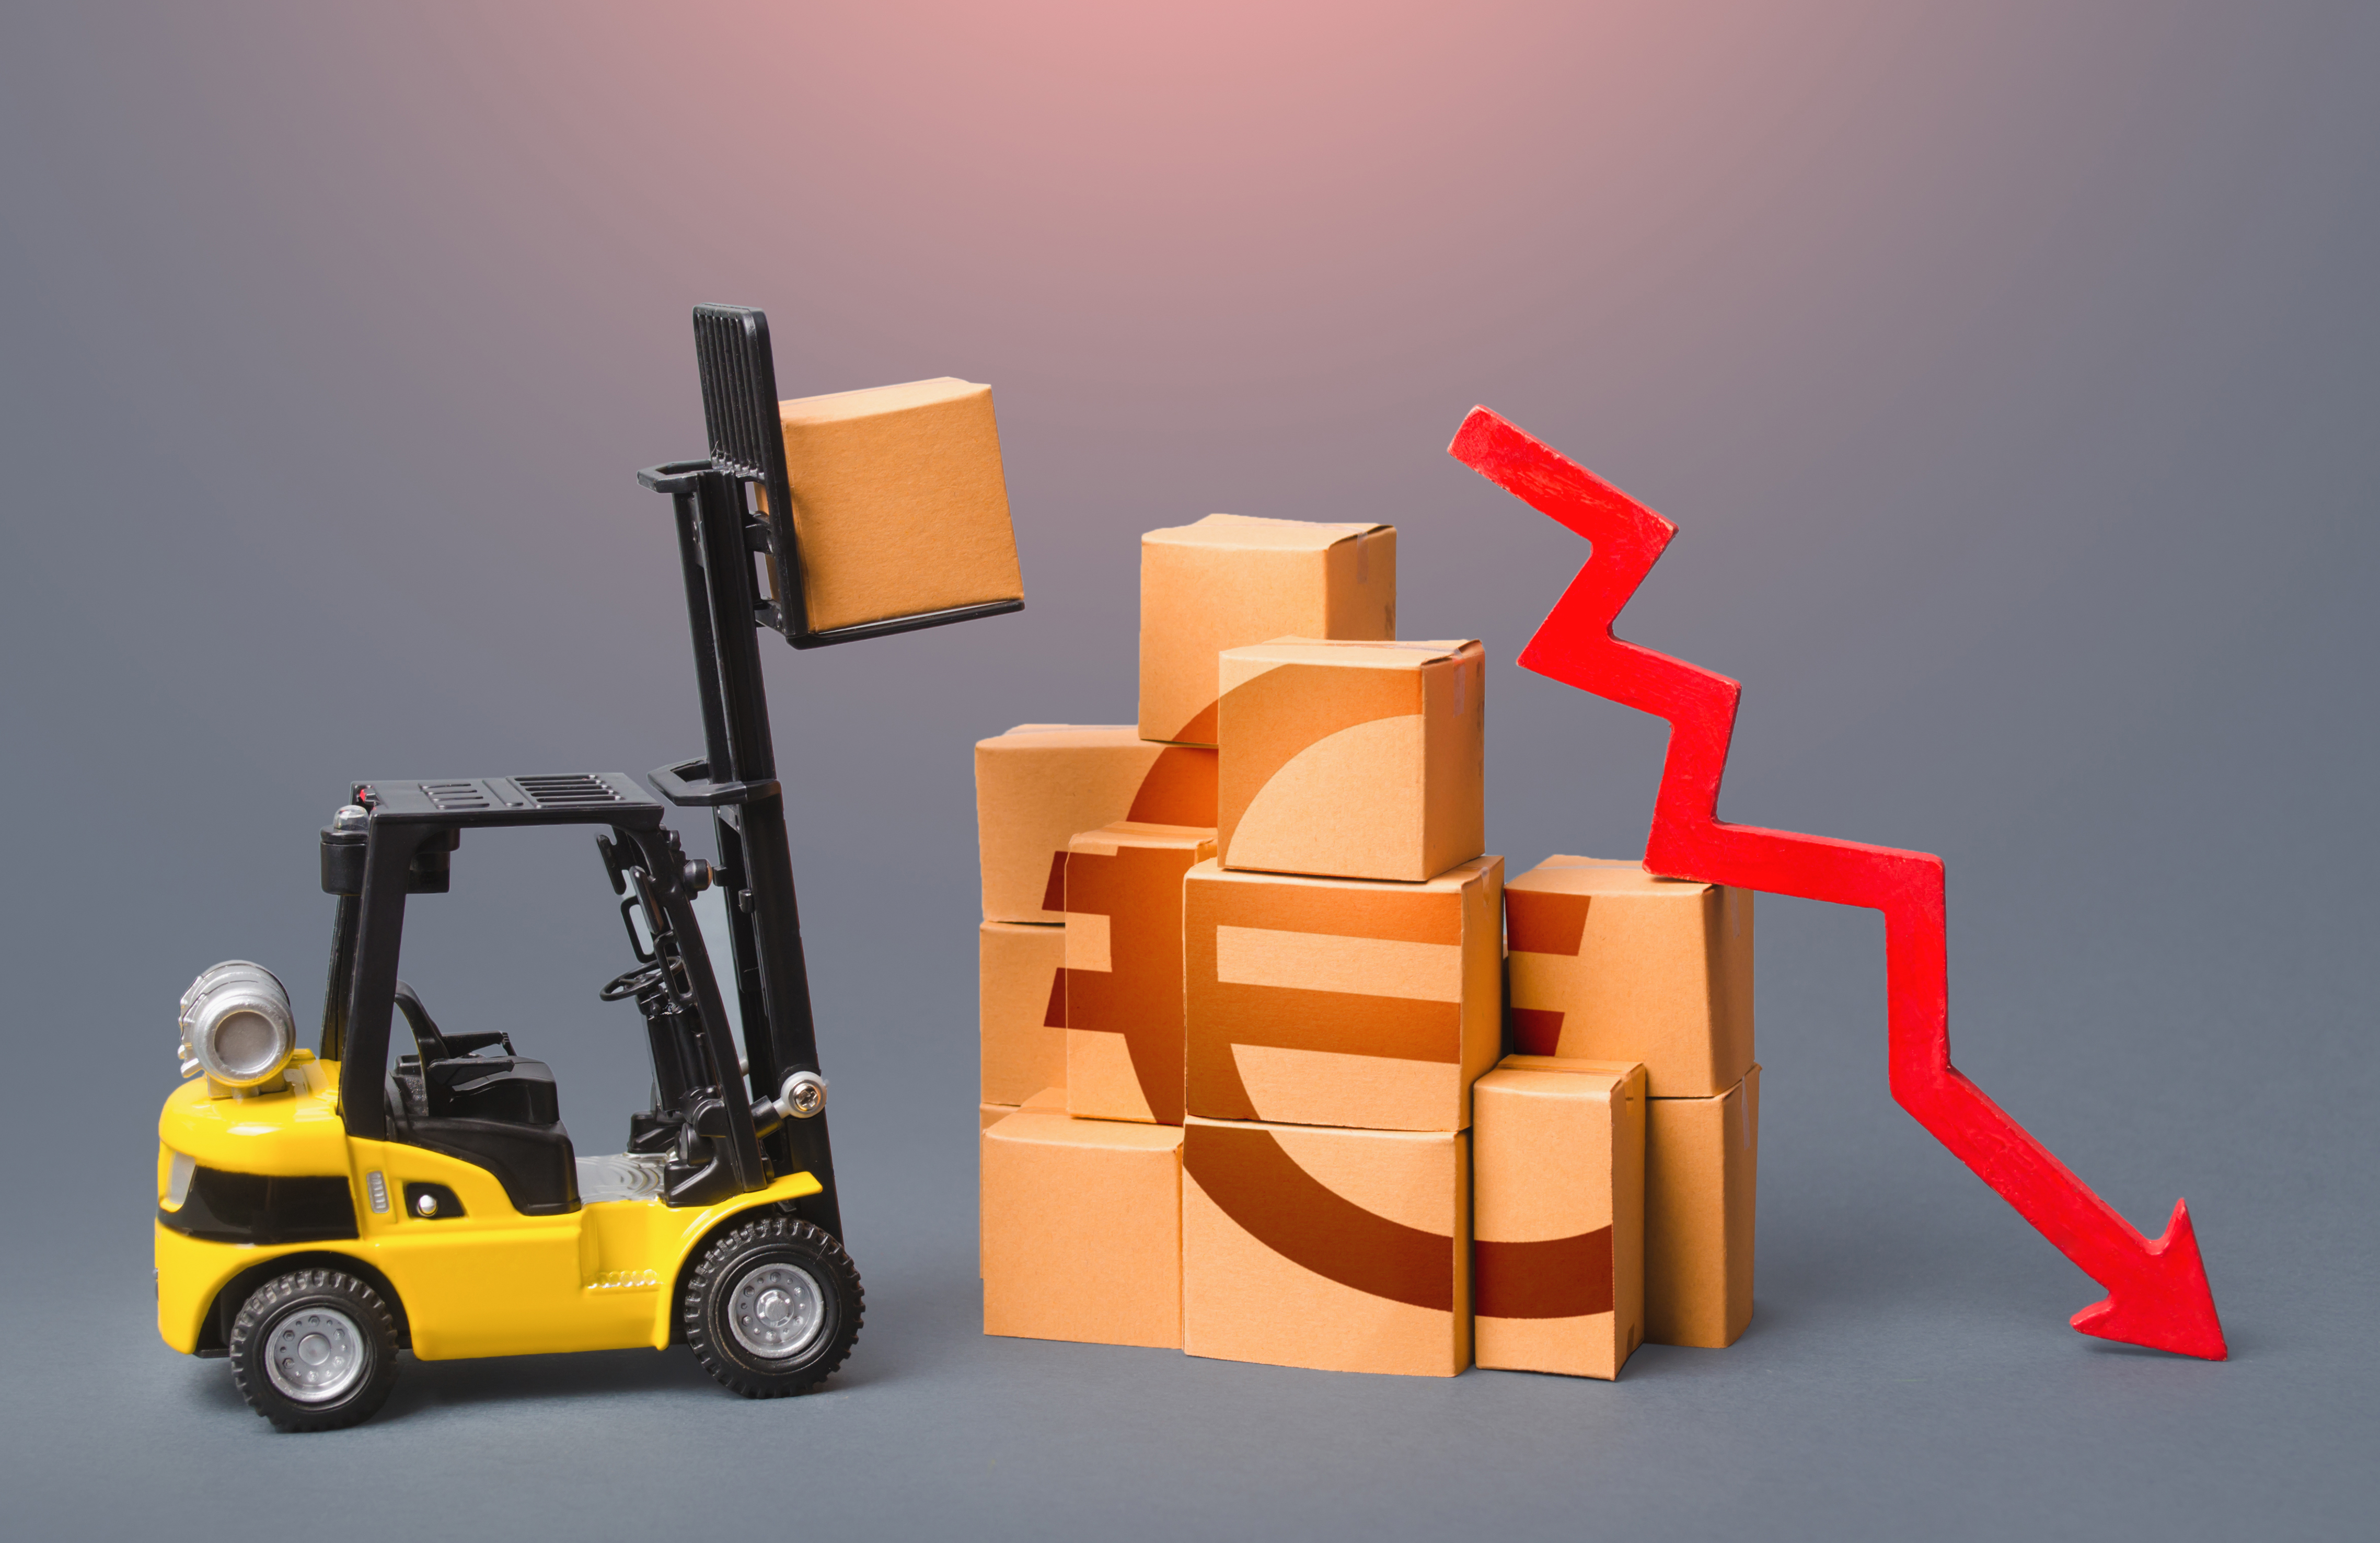 Goods boxes with Euro symbol and red down arrow. revenue drop in the trade and transport industry.